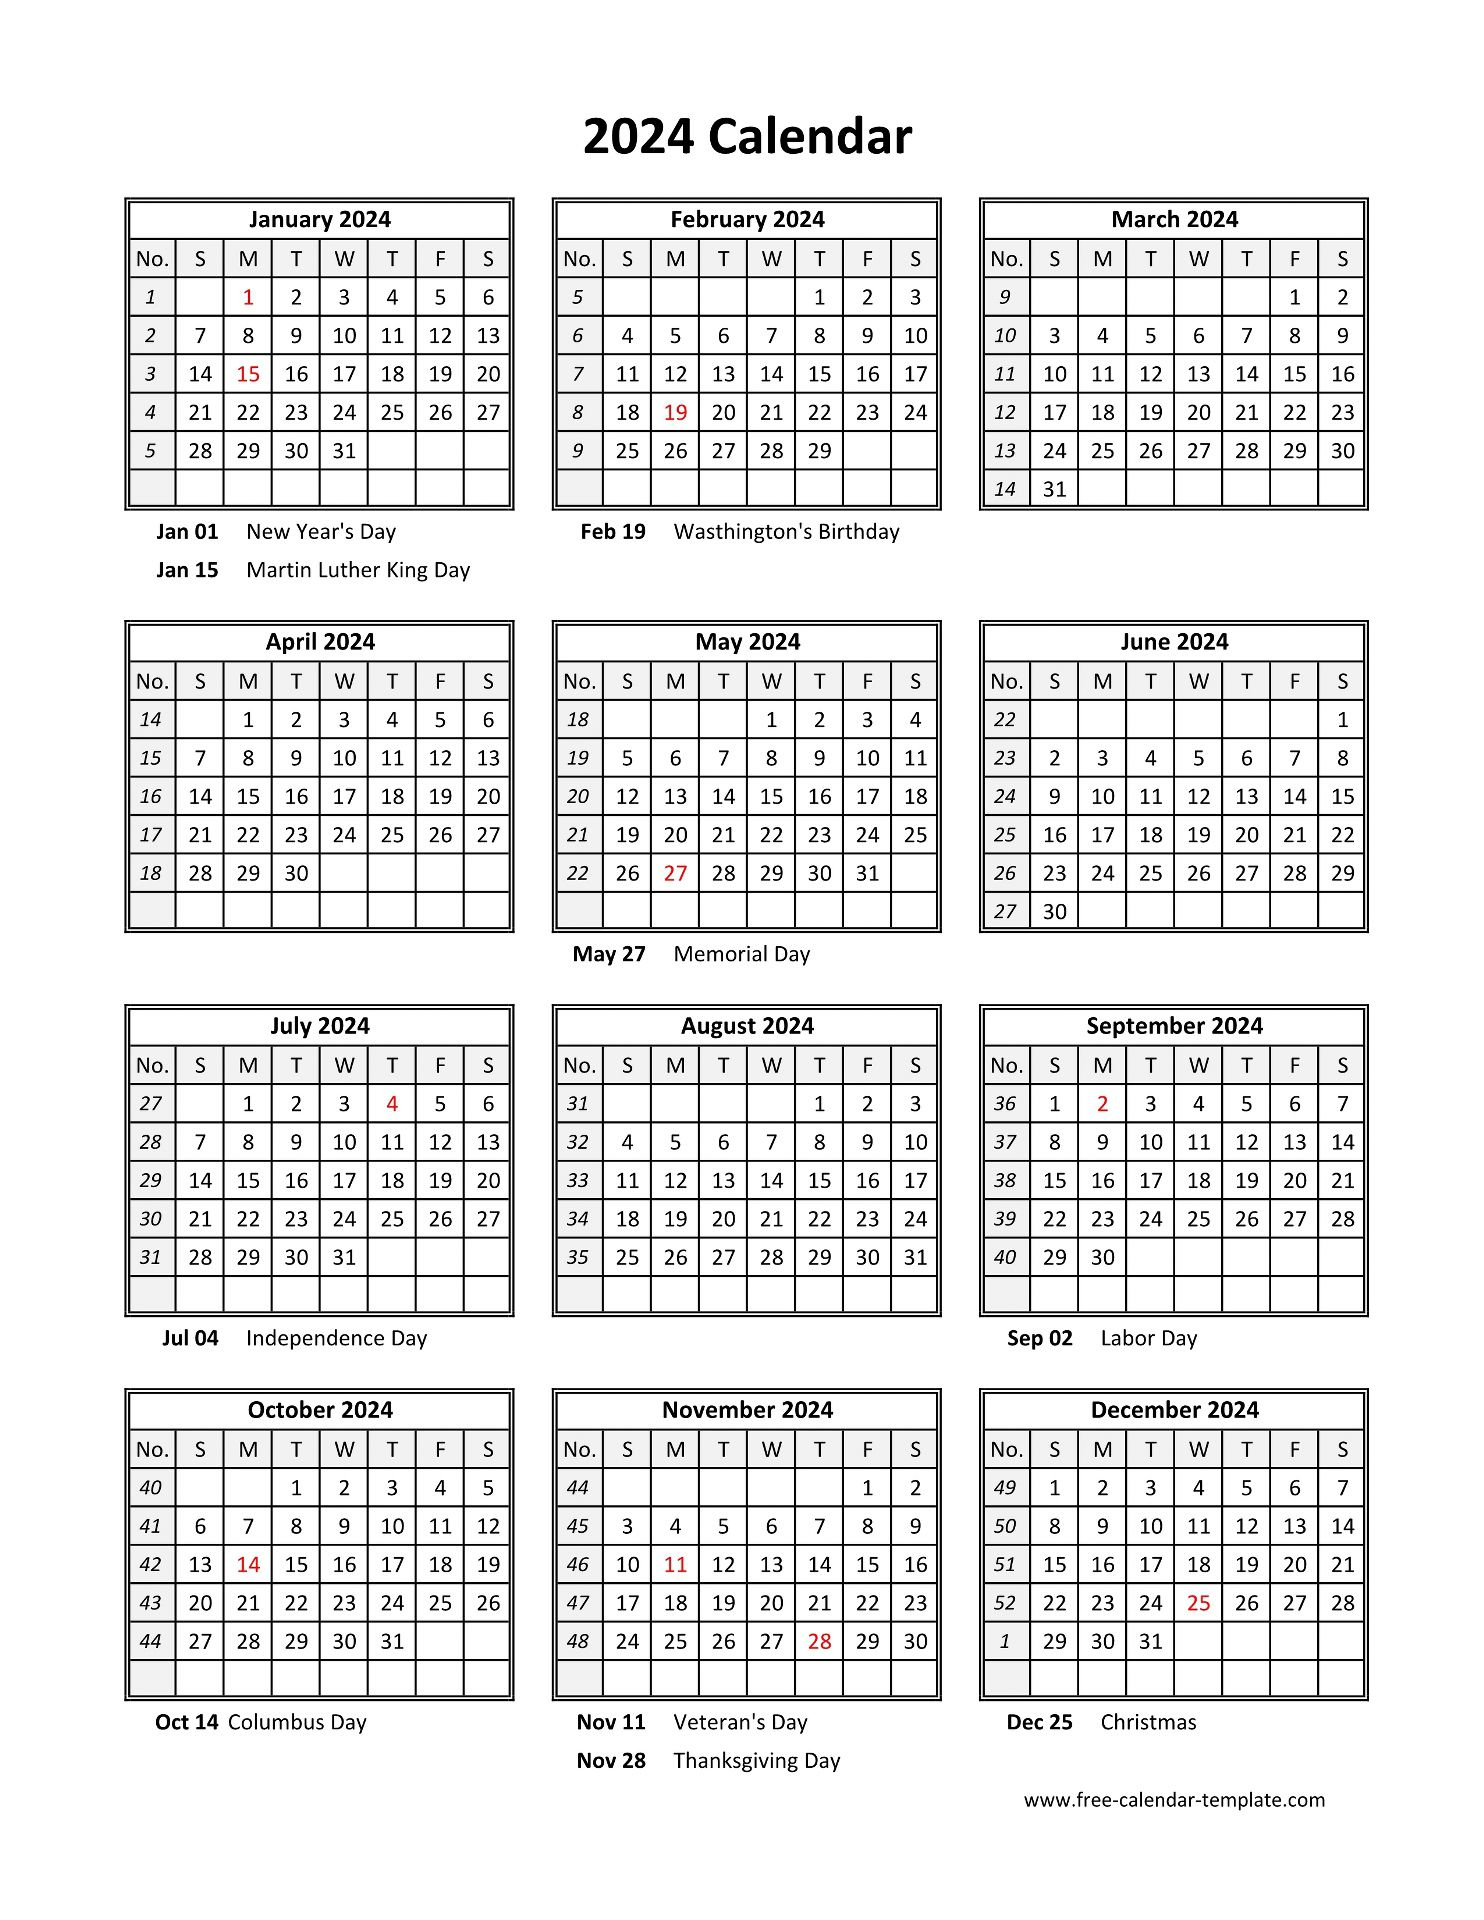 Yearly Printable Calendar 2024 With Holidays | Free-Calendar | Printable 2024 Calendar 12 Months